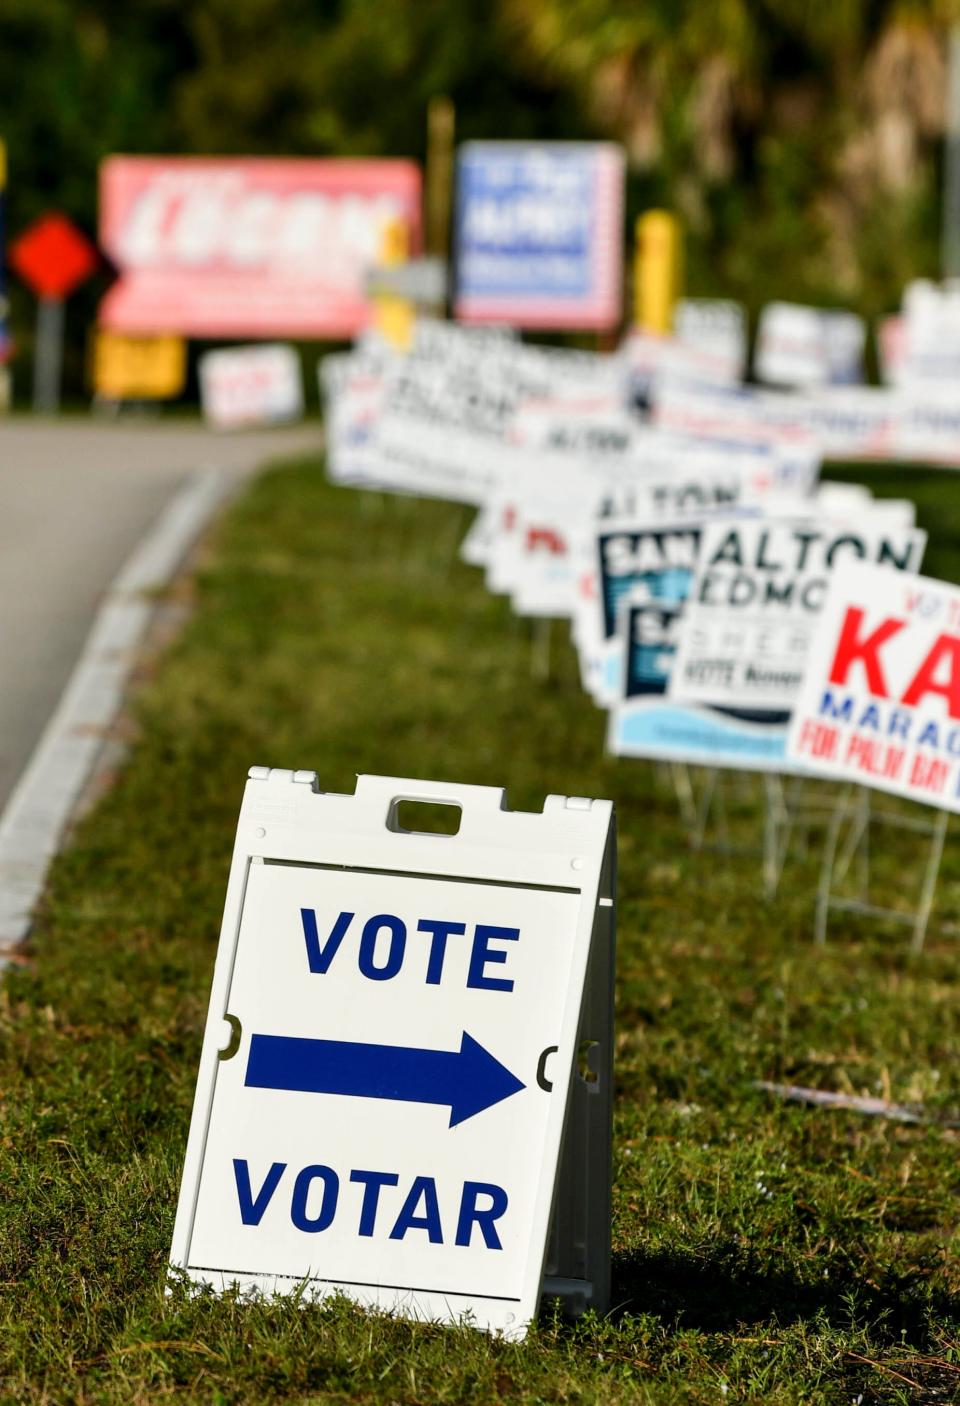 Campaign signs line the road leading to Max K. Rodes Park in West Melbourne, FL Tuesday, Nov. 3, 2020. Mandatory Credit: Craig Bailey/FLORIDA TODAY via USA TODAY NETWORK